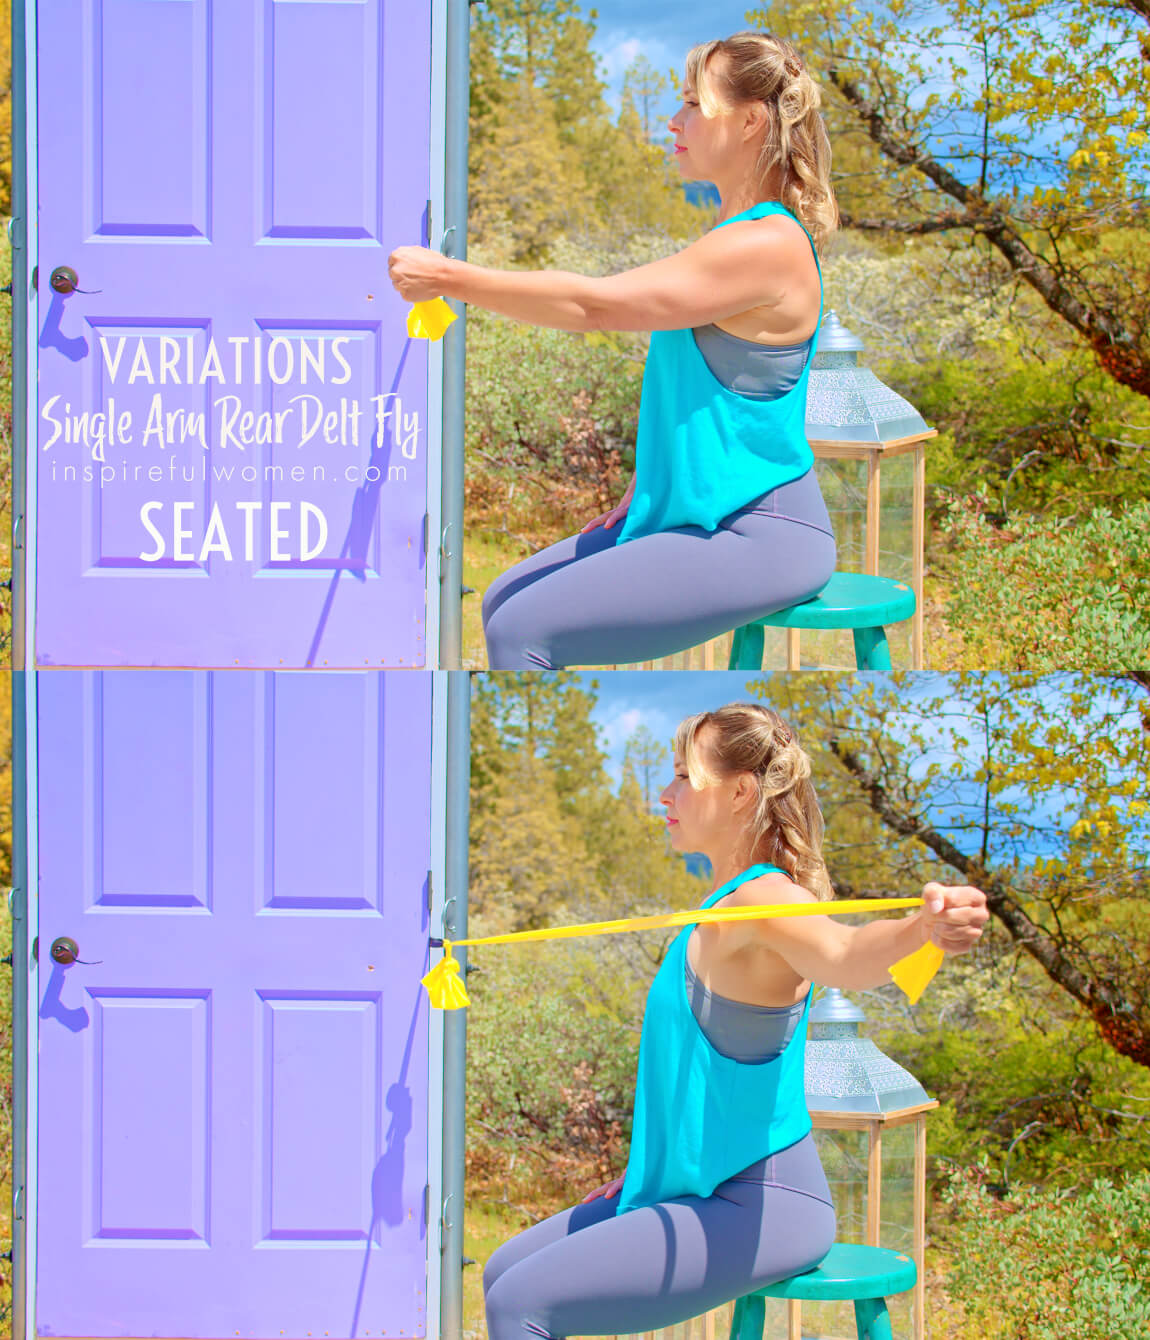 seated-one-arm-posterior-delt-banded-fly-wall-anchored-home-shoulder-workout-variations